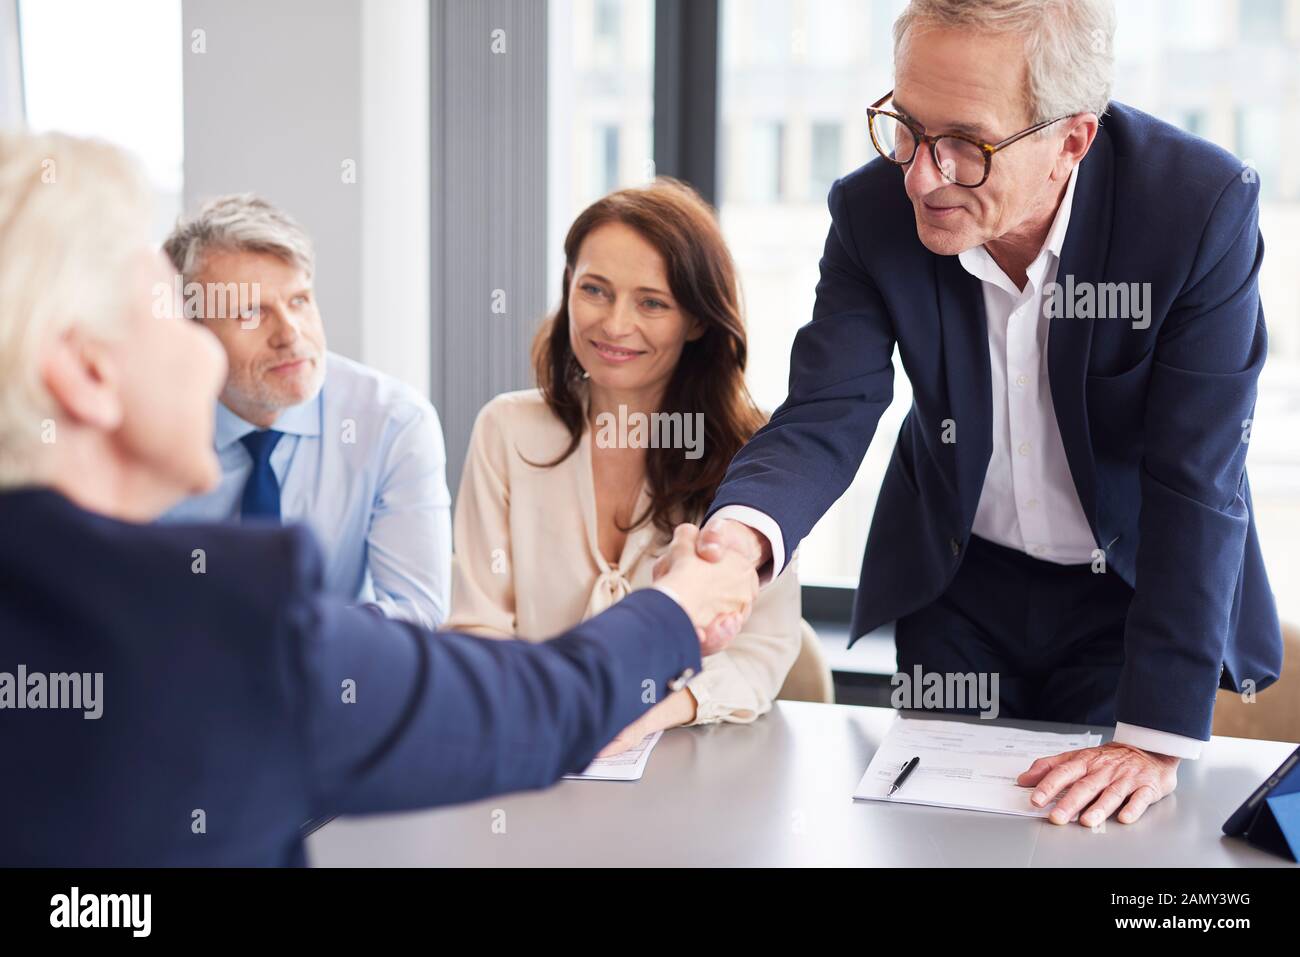 Good deal between business partners during business meeting Stock Photo